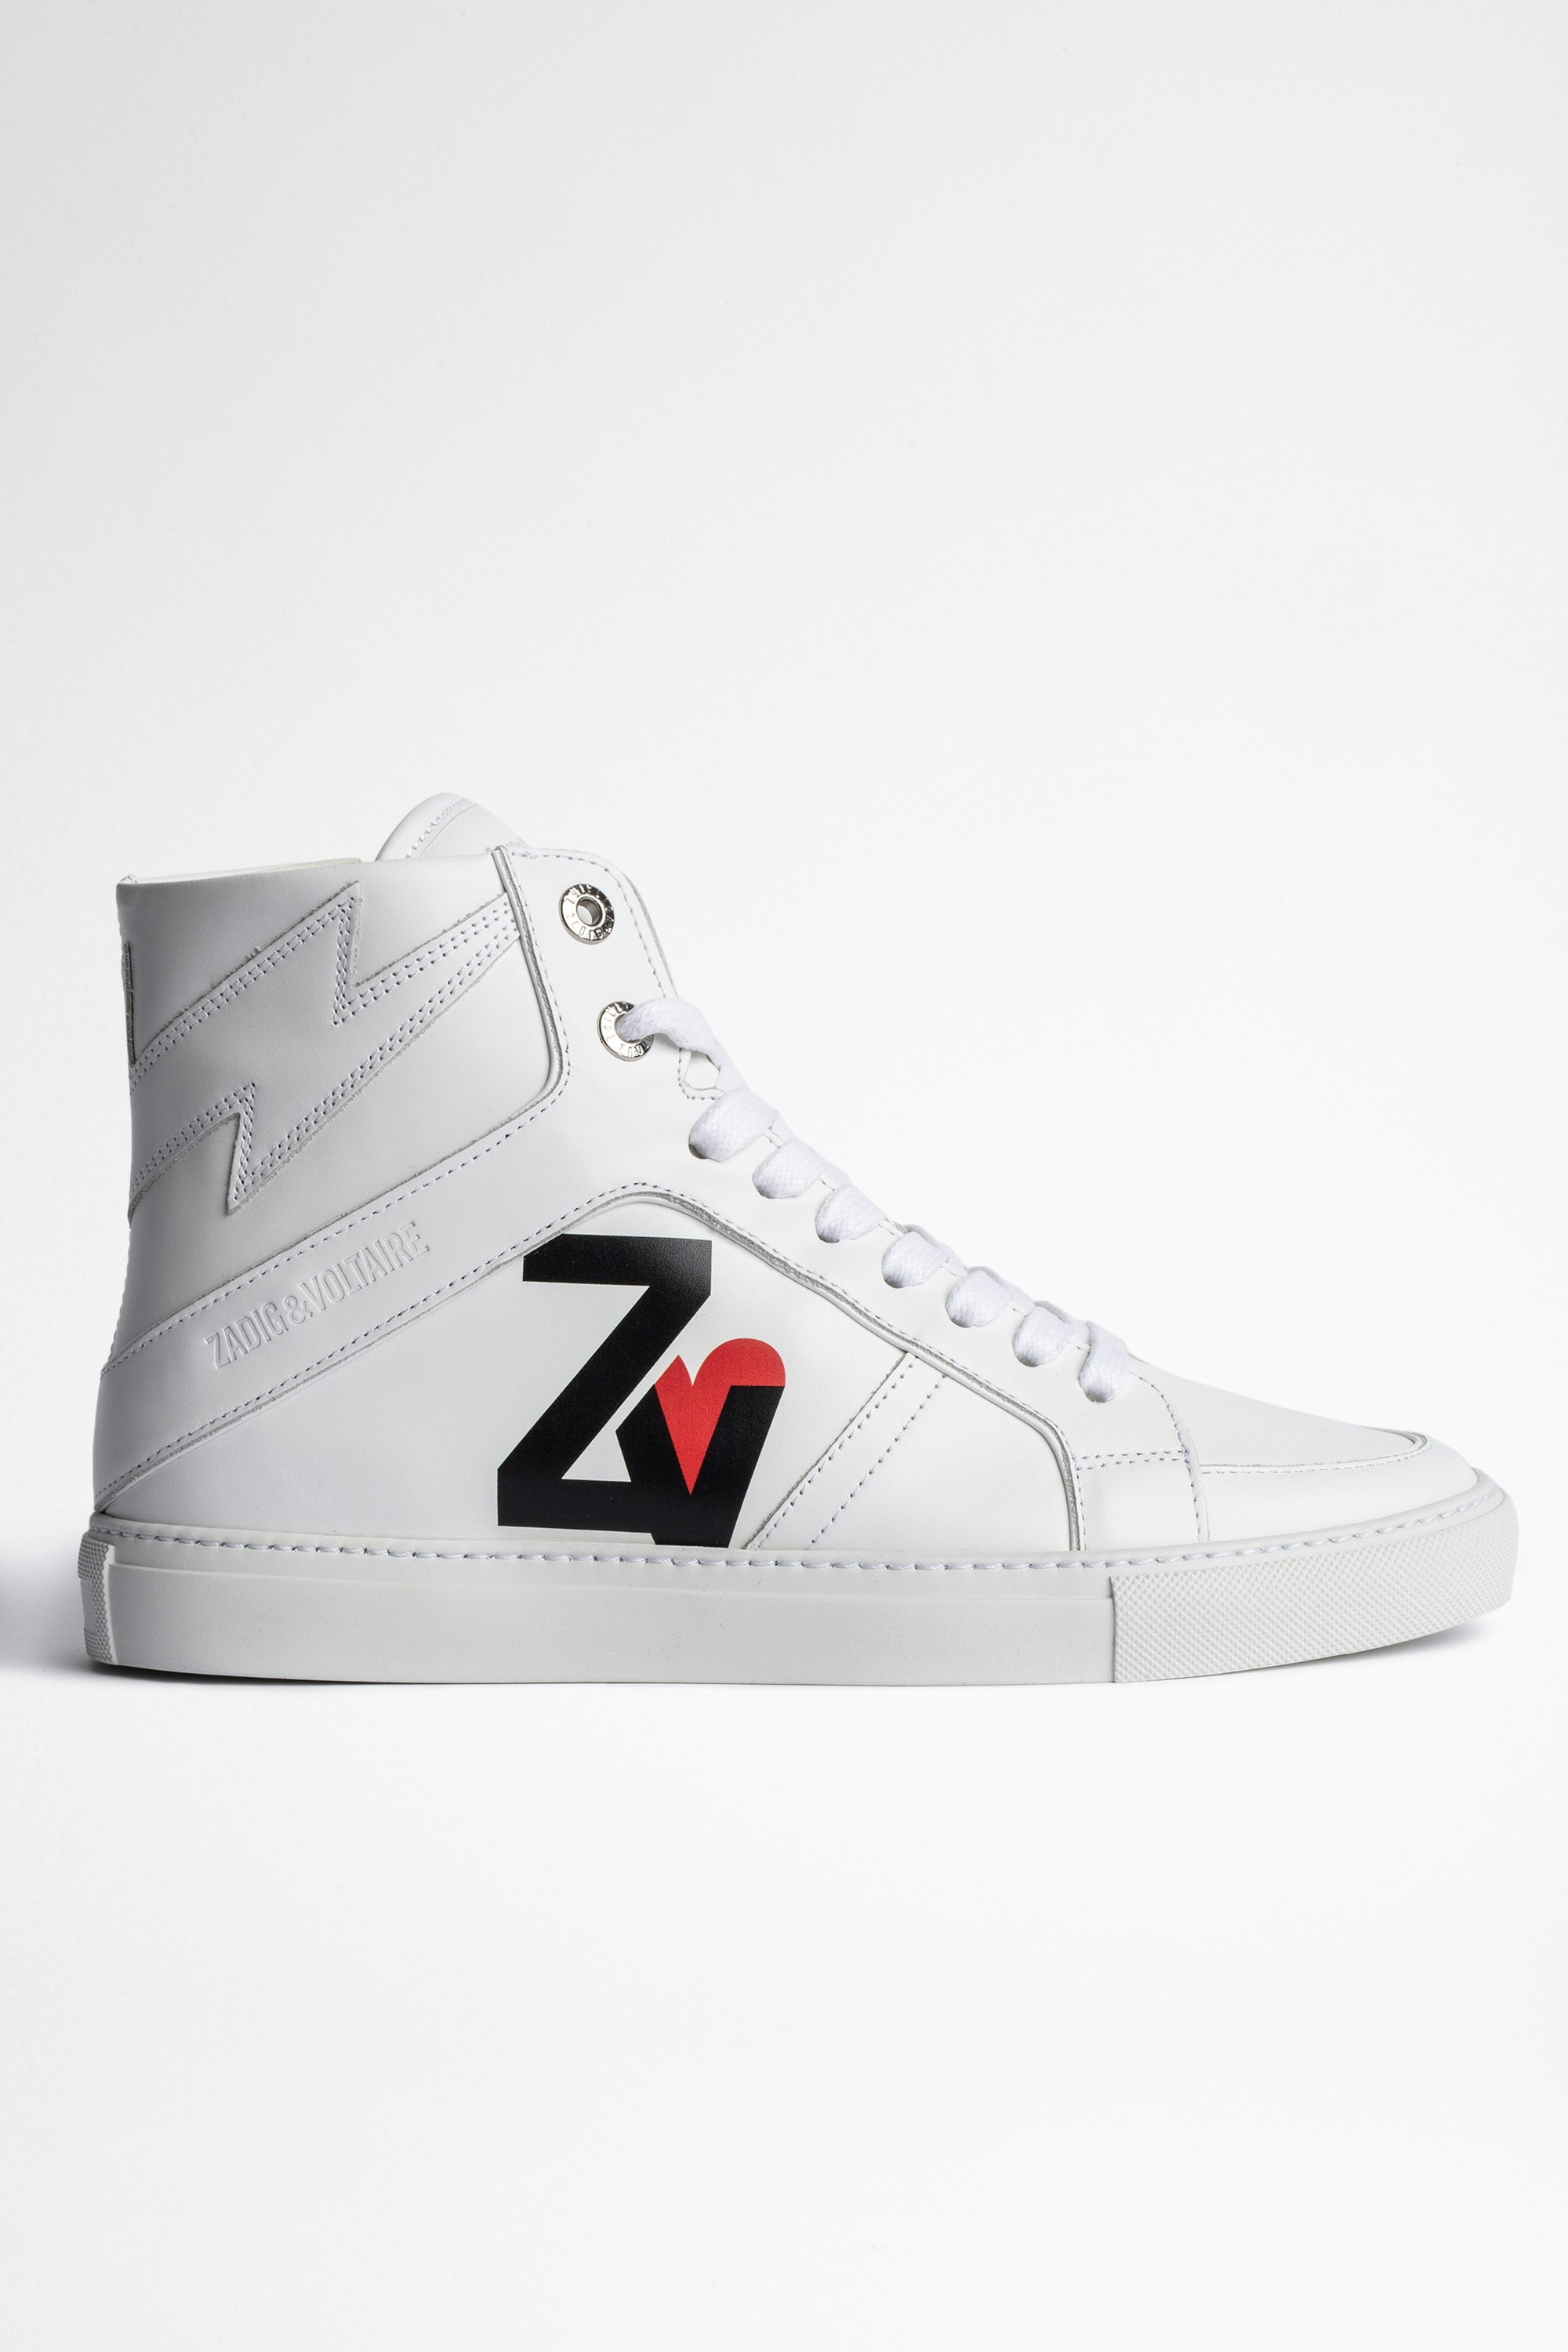 ZV1747 High Flash Sneakers Leather Women’s white leather high-top sneakers with ZV heart